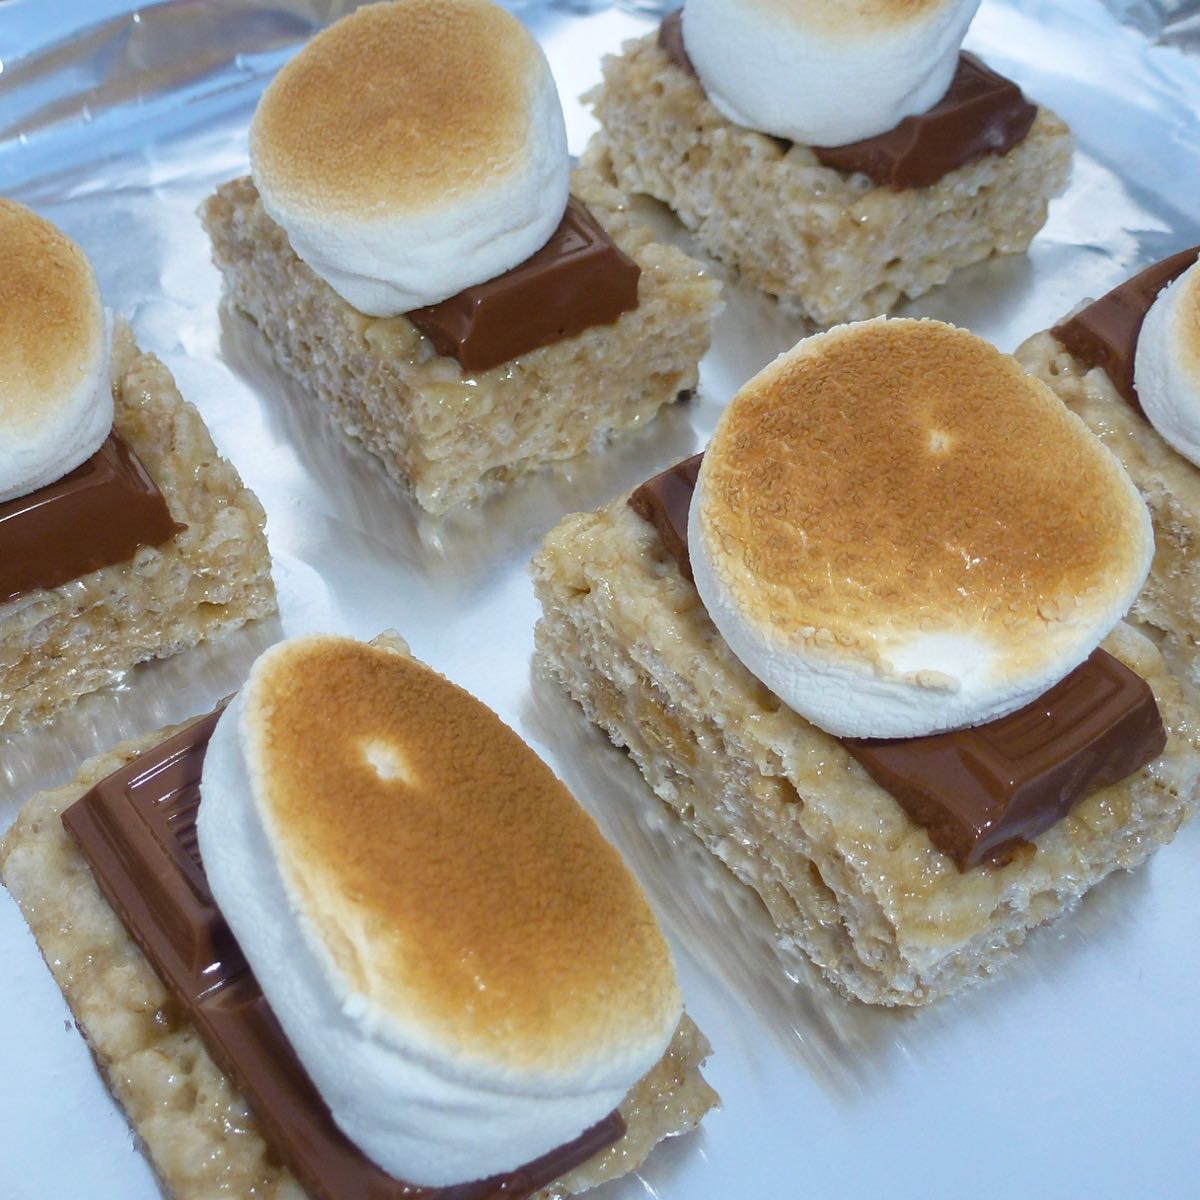 Gluten Free Rice Krispie Smores toasted and ready to eat.